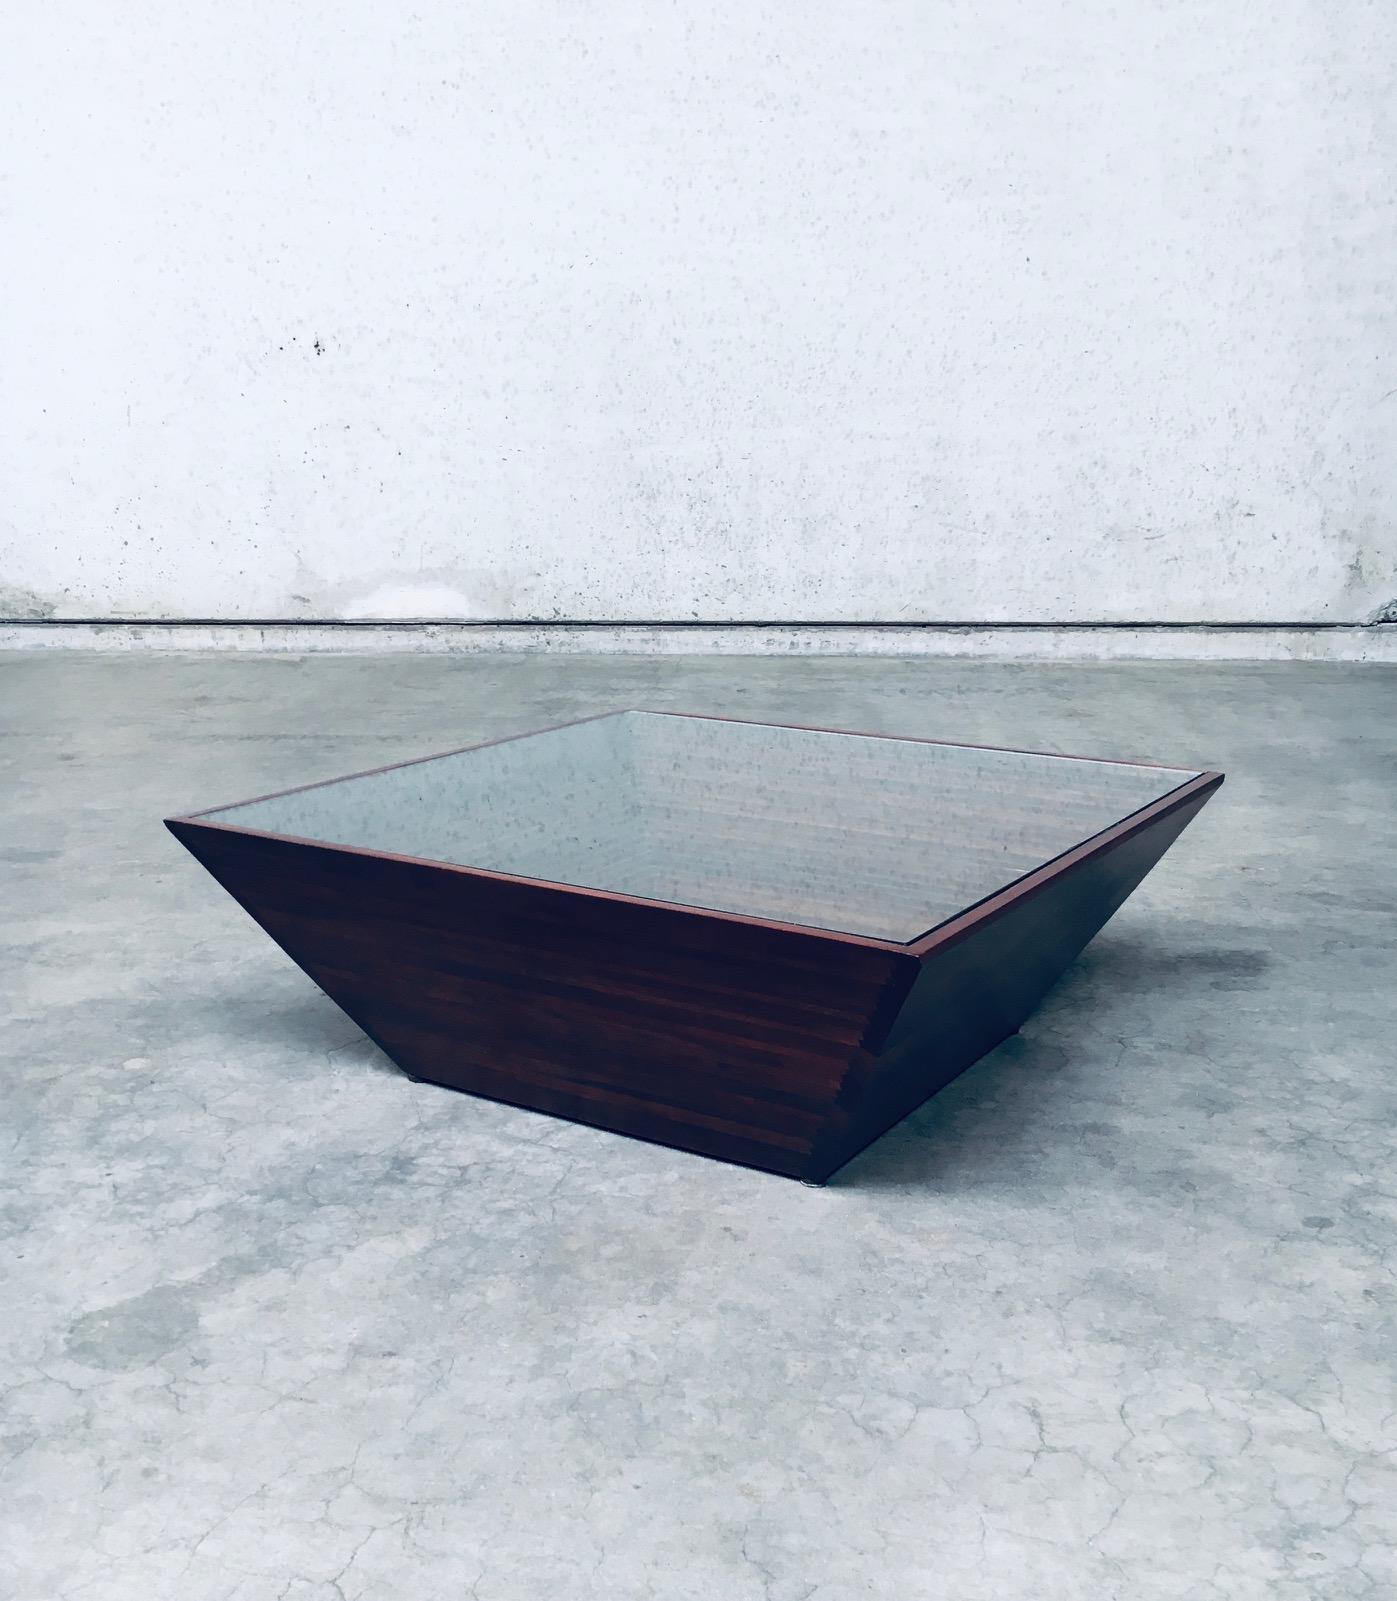 Postmodern Design 'Reverse Pyramid' Square Coffee Table. Made in the 1980's. Wood reverse pyramid shape with steps on the inside. Black glass on the bottom and clear glass on top. A well executed and designed coffee table. Minimalist and